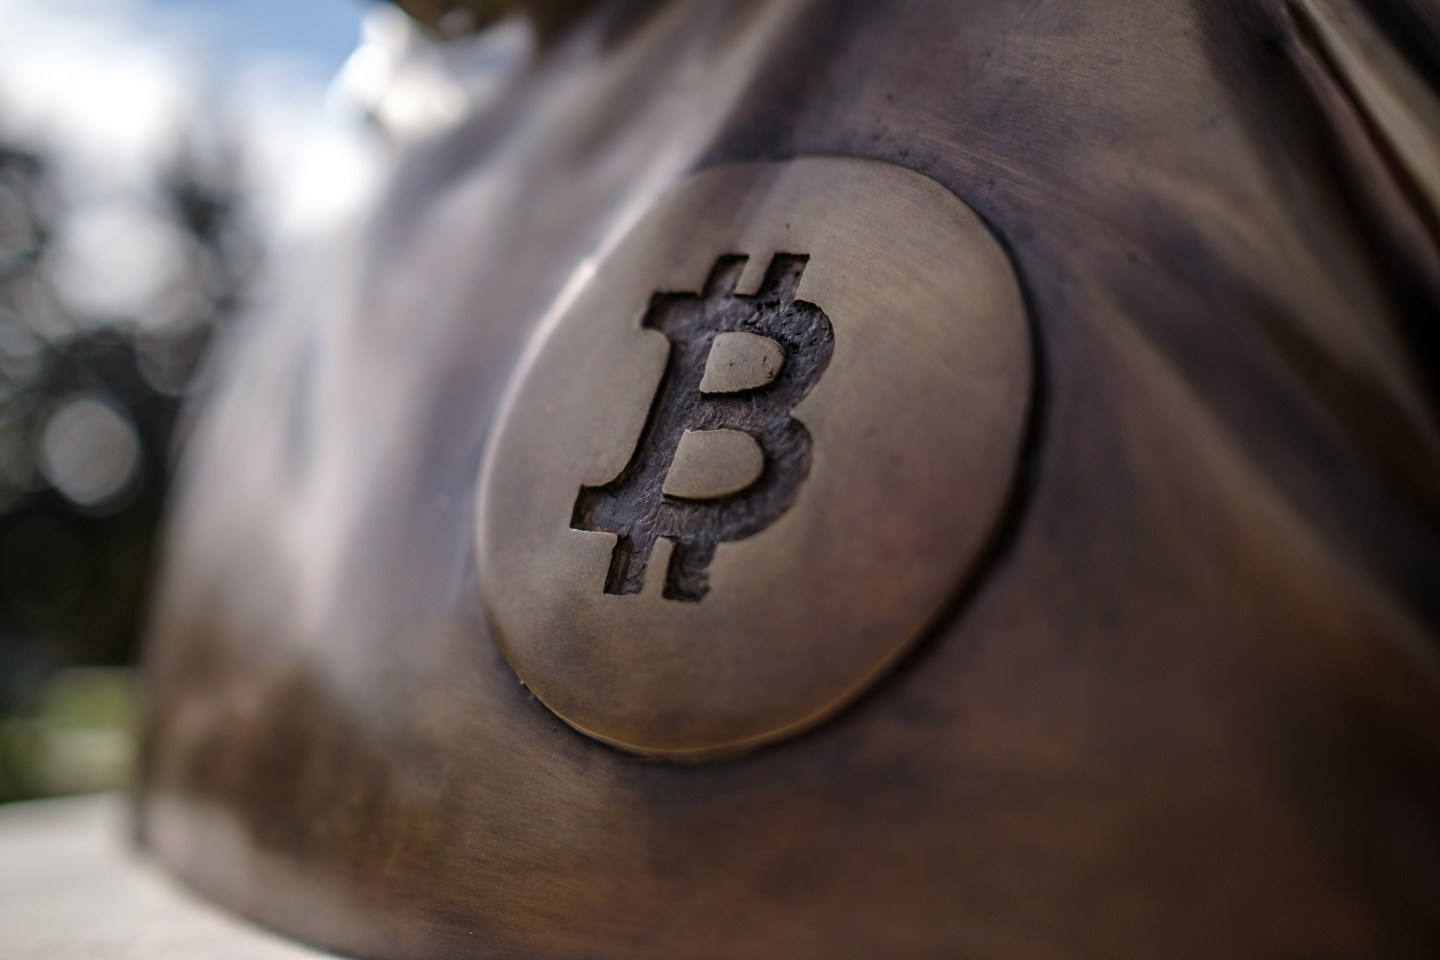 BUDAPEST, HUNGARY - SEPTEMBER 22: A detail of the statue of Satoshi Nakamoto, a presumed pseudonym used by the inventor of Bitcoin, which is displayed in Graphisoft Park on September 22, 2021 in Budapest, Hungary. The statue&#039;s creators, Reka Gergely and Tamas Gilly, used anonymized facial features, as Nakamoto&#039;s true identify remains unconfirmed. (Photo by Janos Kummer/Getty Images)